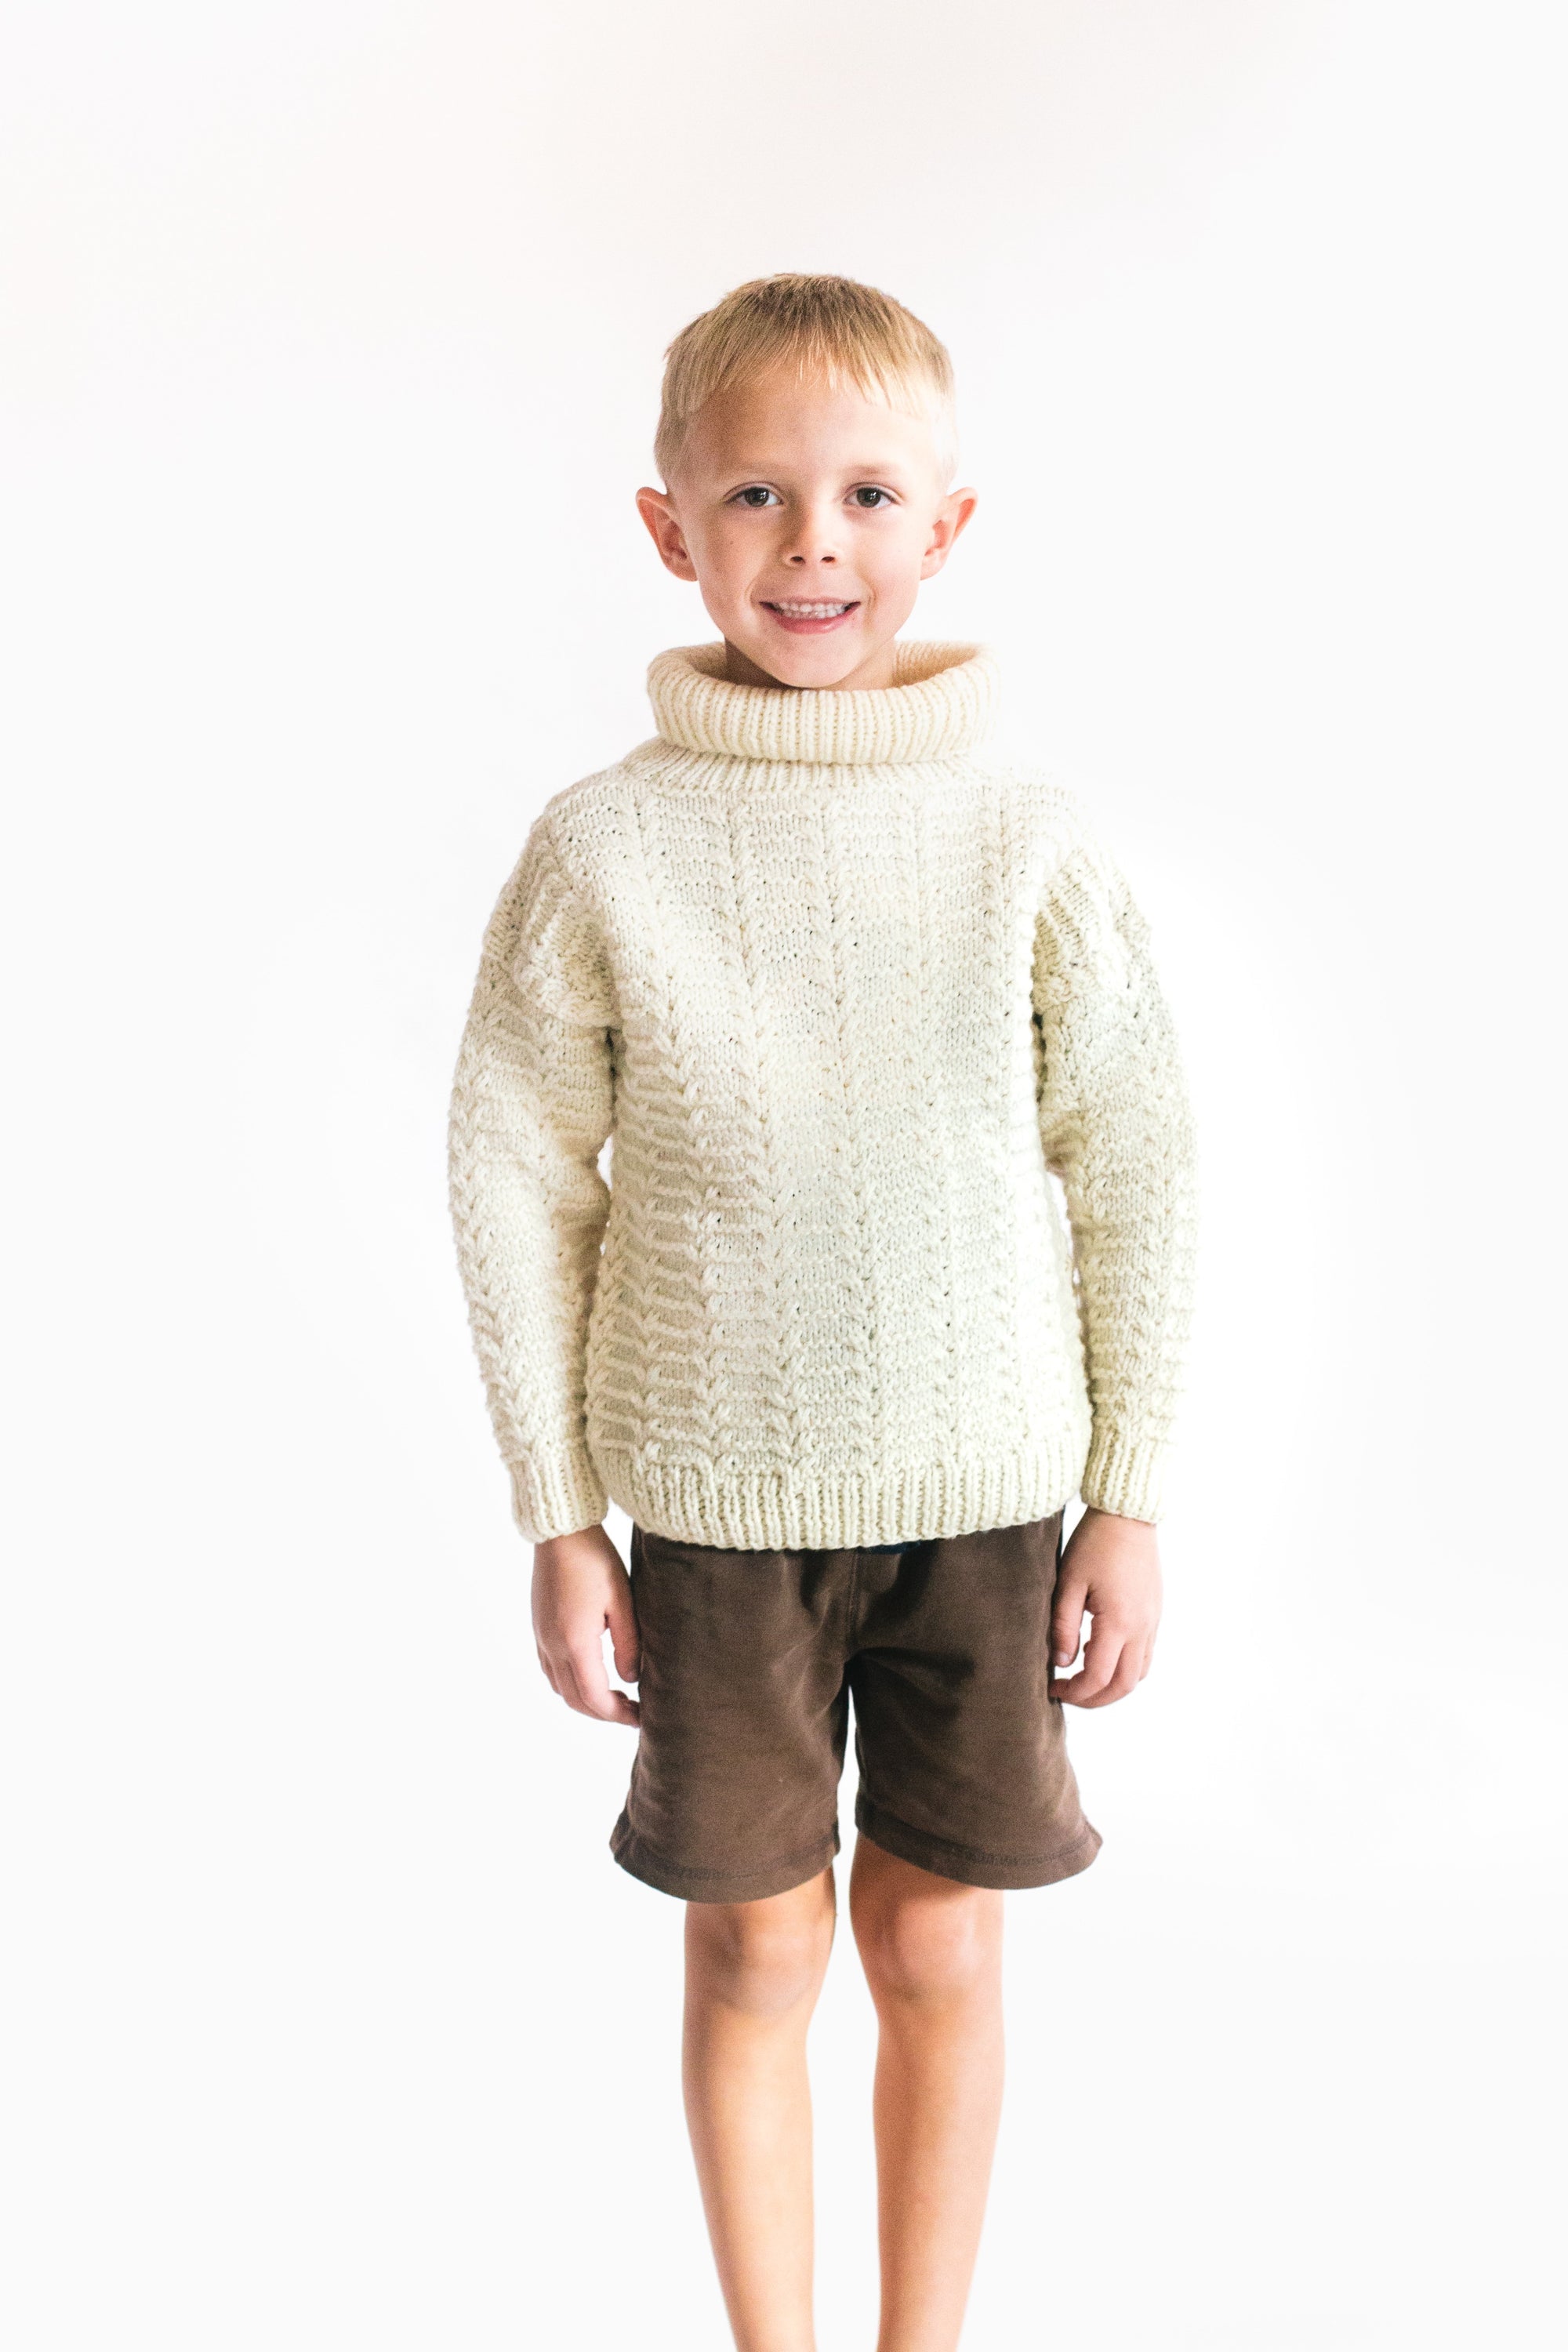 Small boy wearing a cream colored knitted sweater standing in front of a white screen